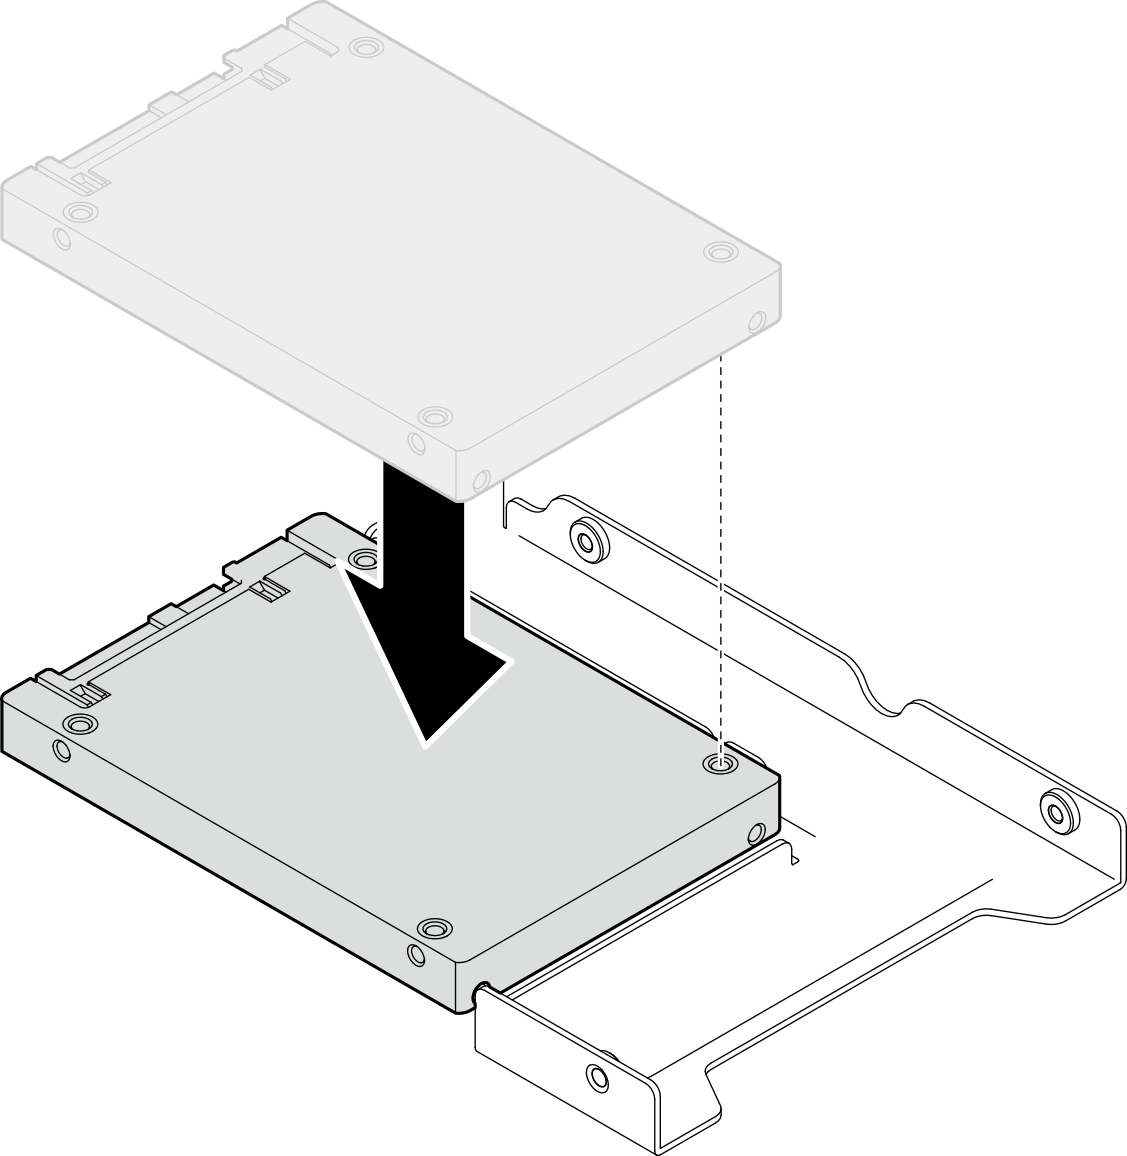 Positioning the 2.5-inch drive into the drive adapter